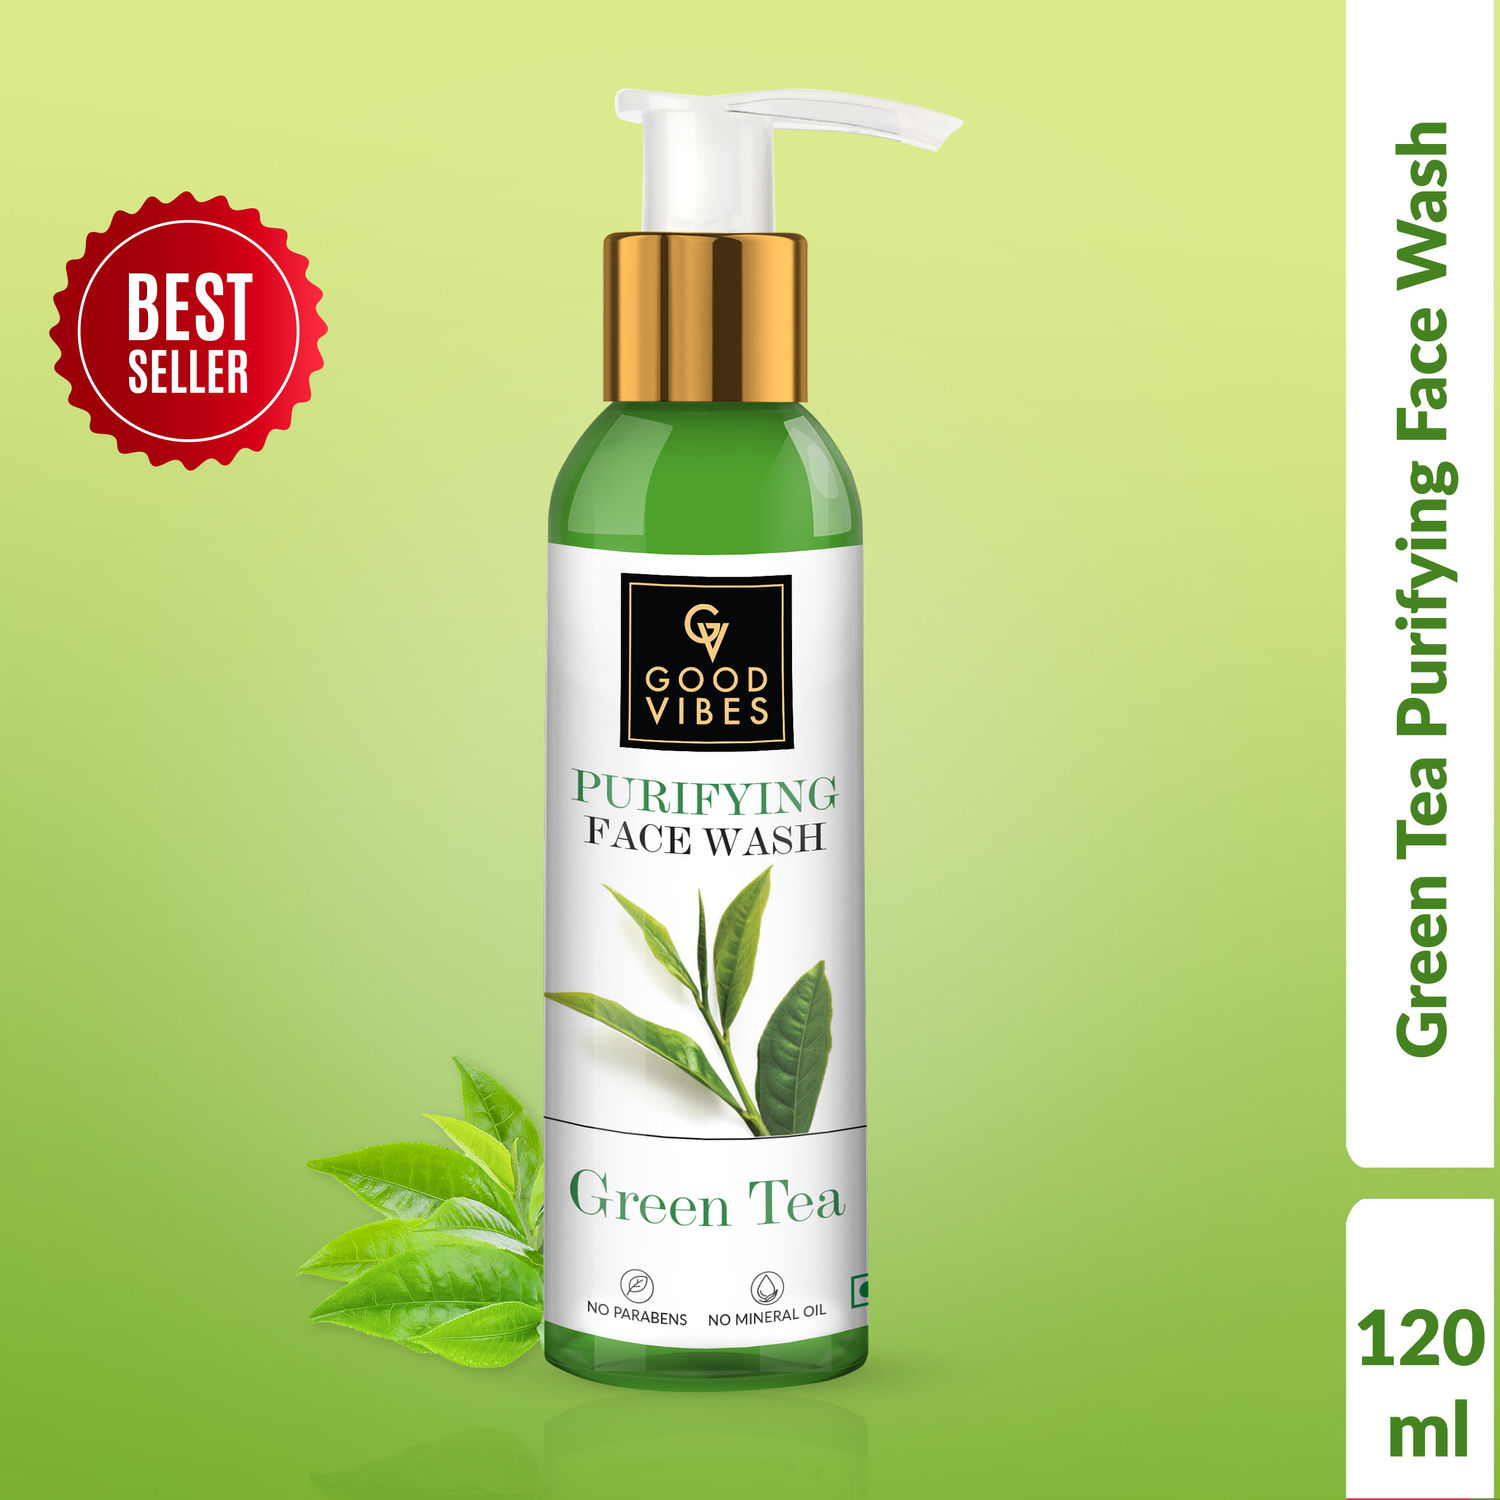 Buy Good Vibes Green Tea Purifying Face Wash | Deep Cleansing, Prevents Acne | With Aloe Vera | No Parabens, No Mineral Oil, No Animal Testing (120 ml) - Purplle